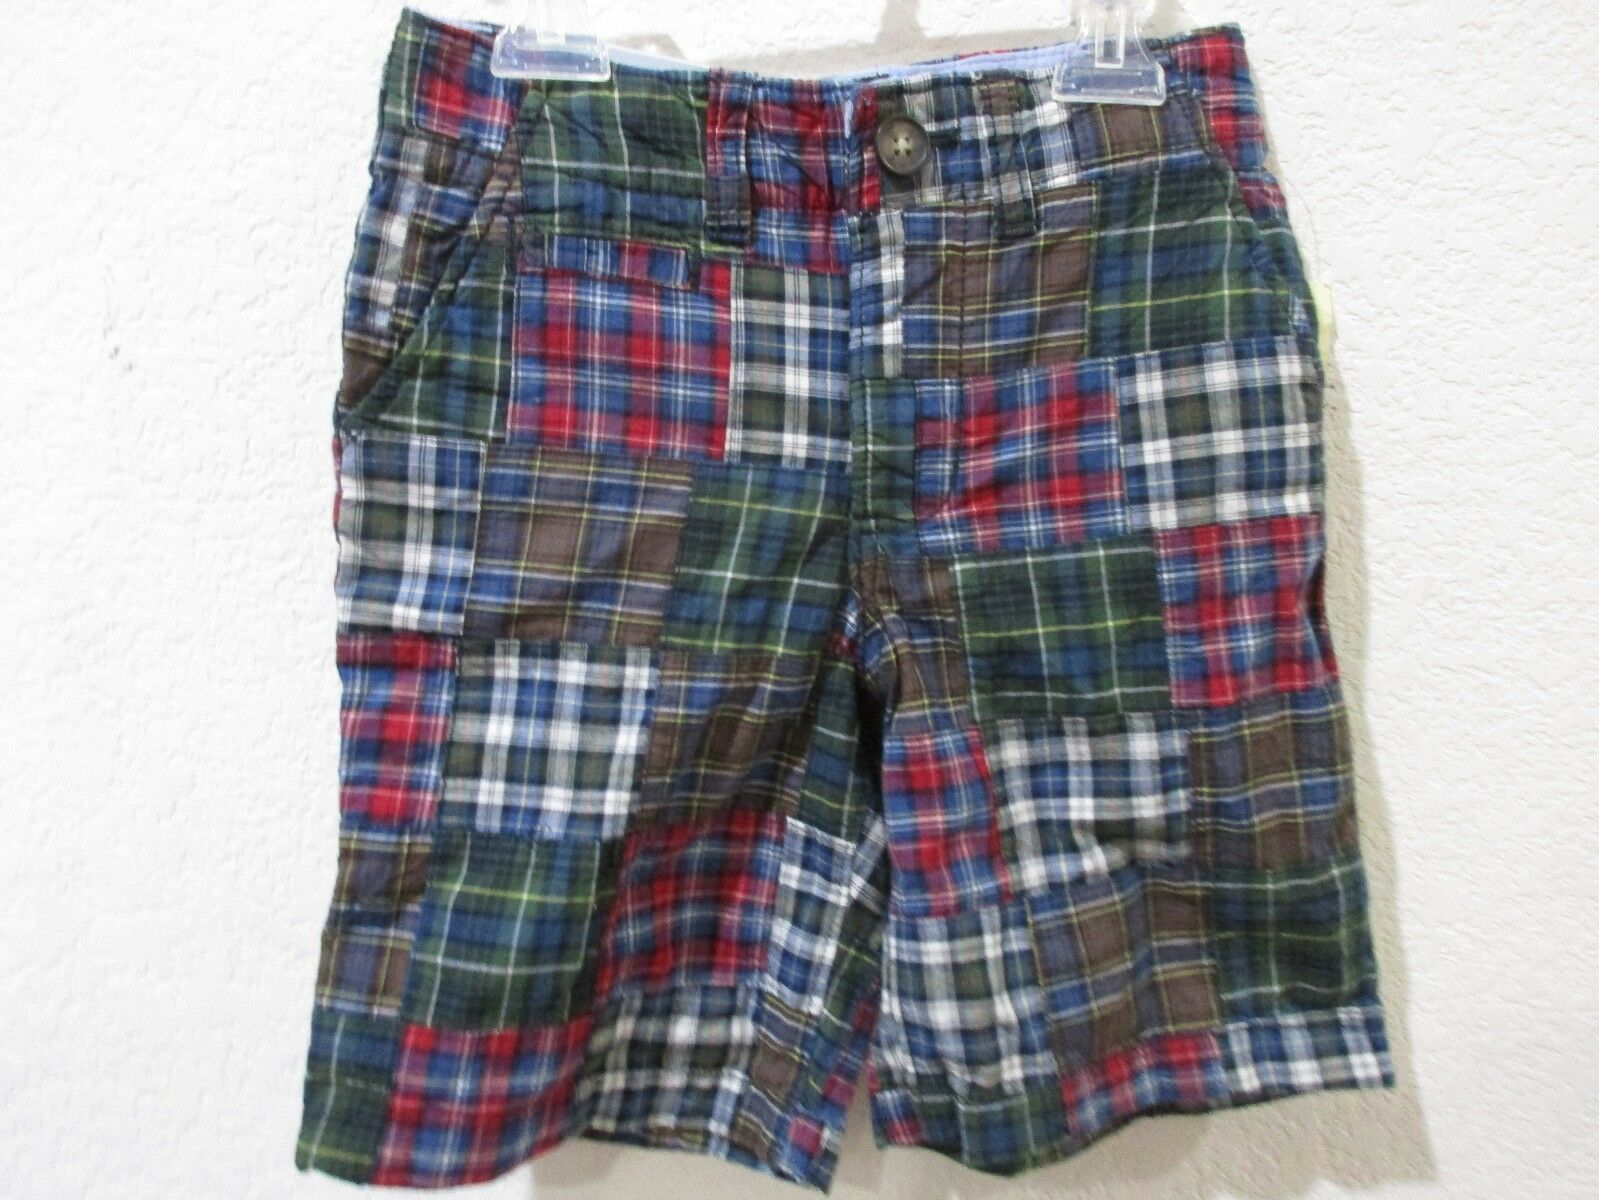 Primary image for NWT Baby Gap Boys Madras Patchwork Plaid Shorts Size 4yrs